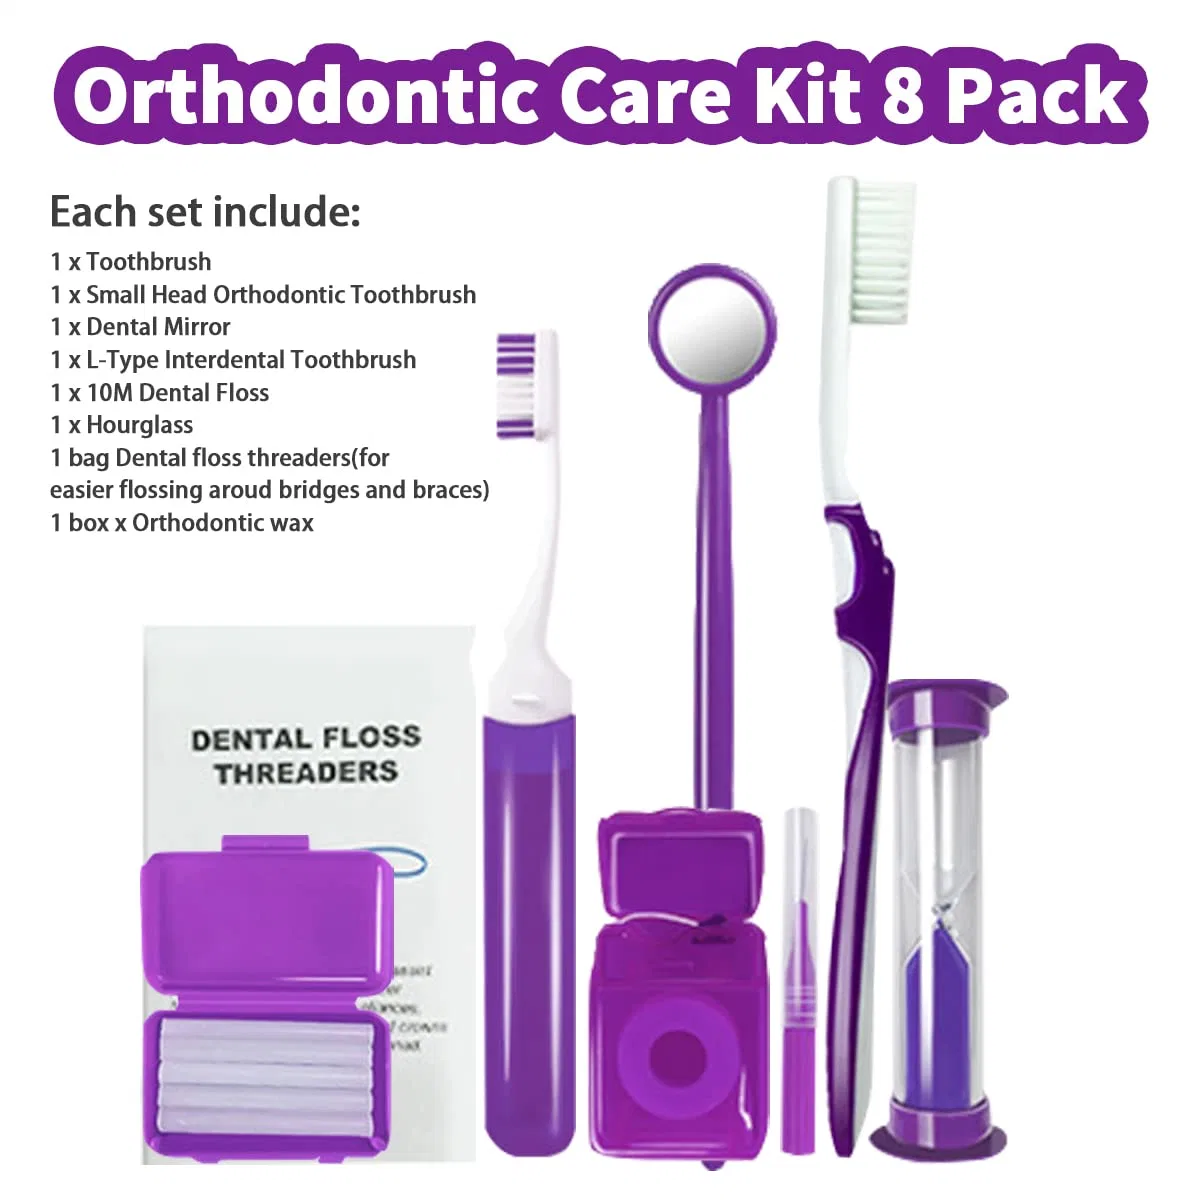 Profissional Hot Sell dentes Oral Cleaning Care Box uso doméstico Kit de limpeza